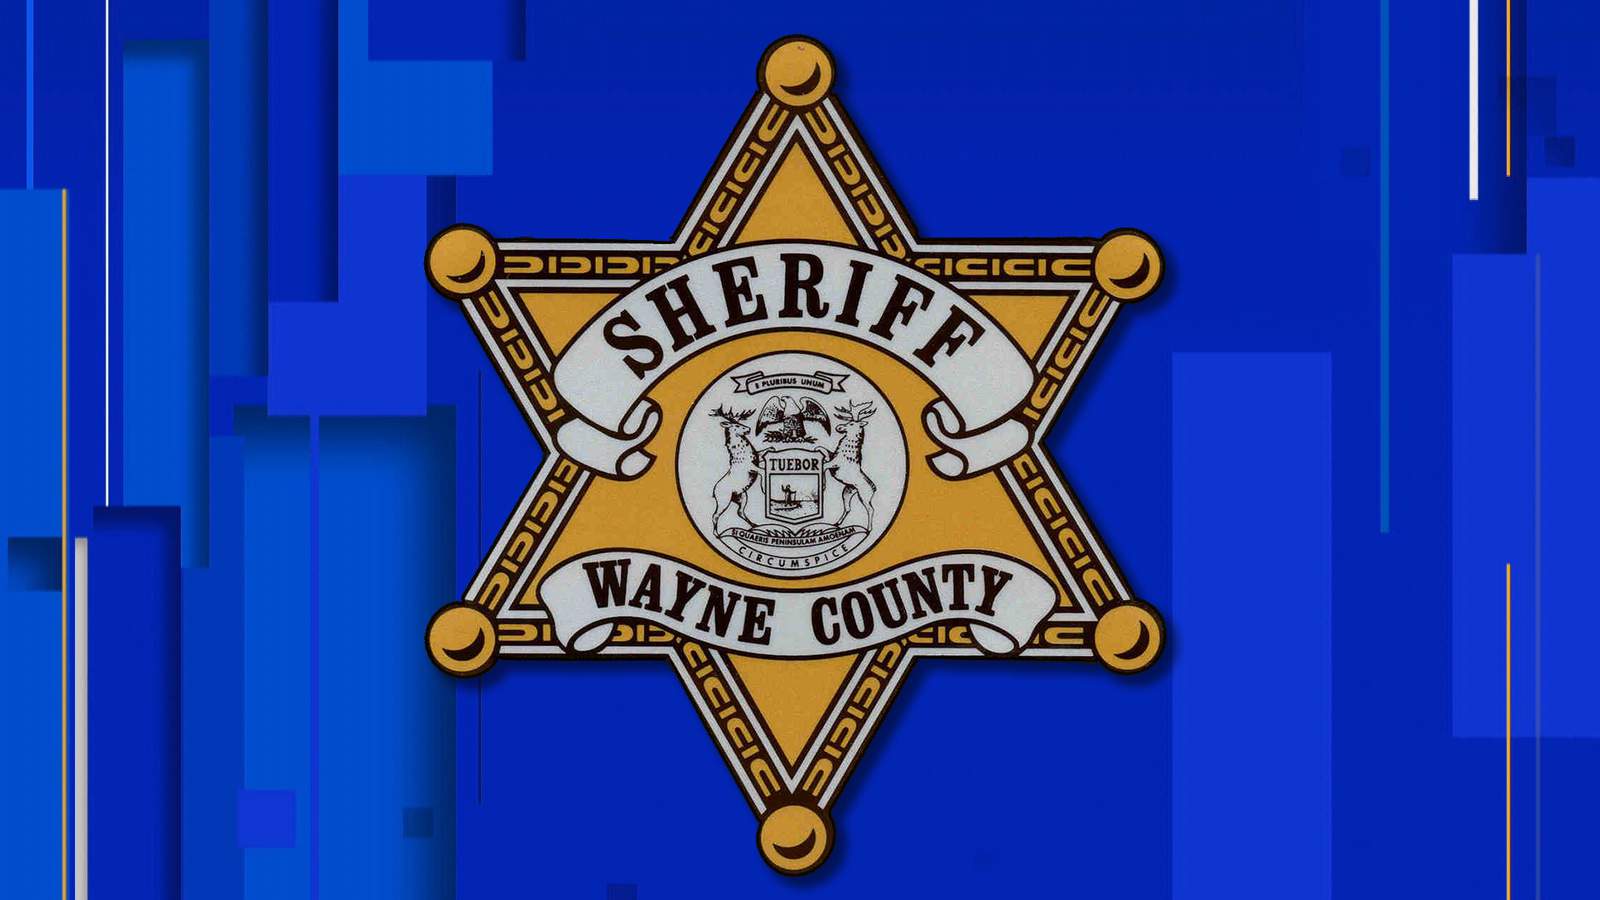 14 applicants being interviewed for appointment of Wayne County sheriff